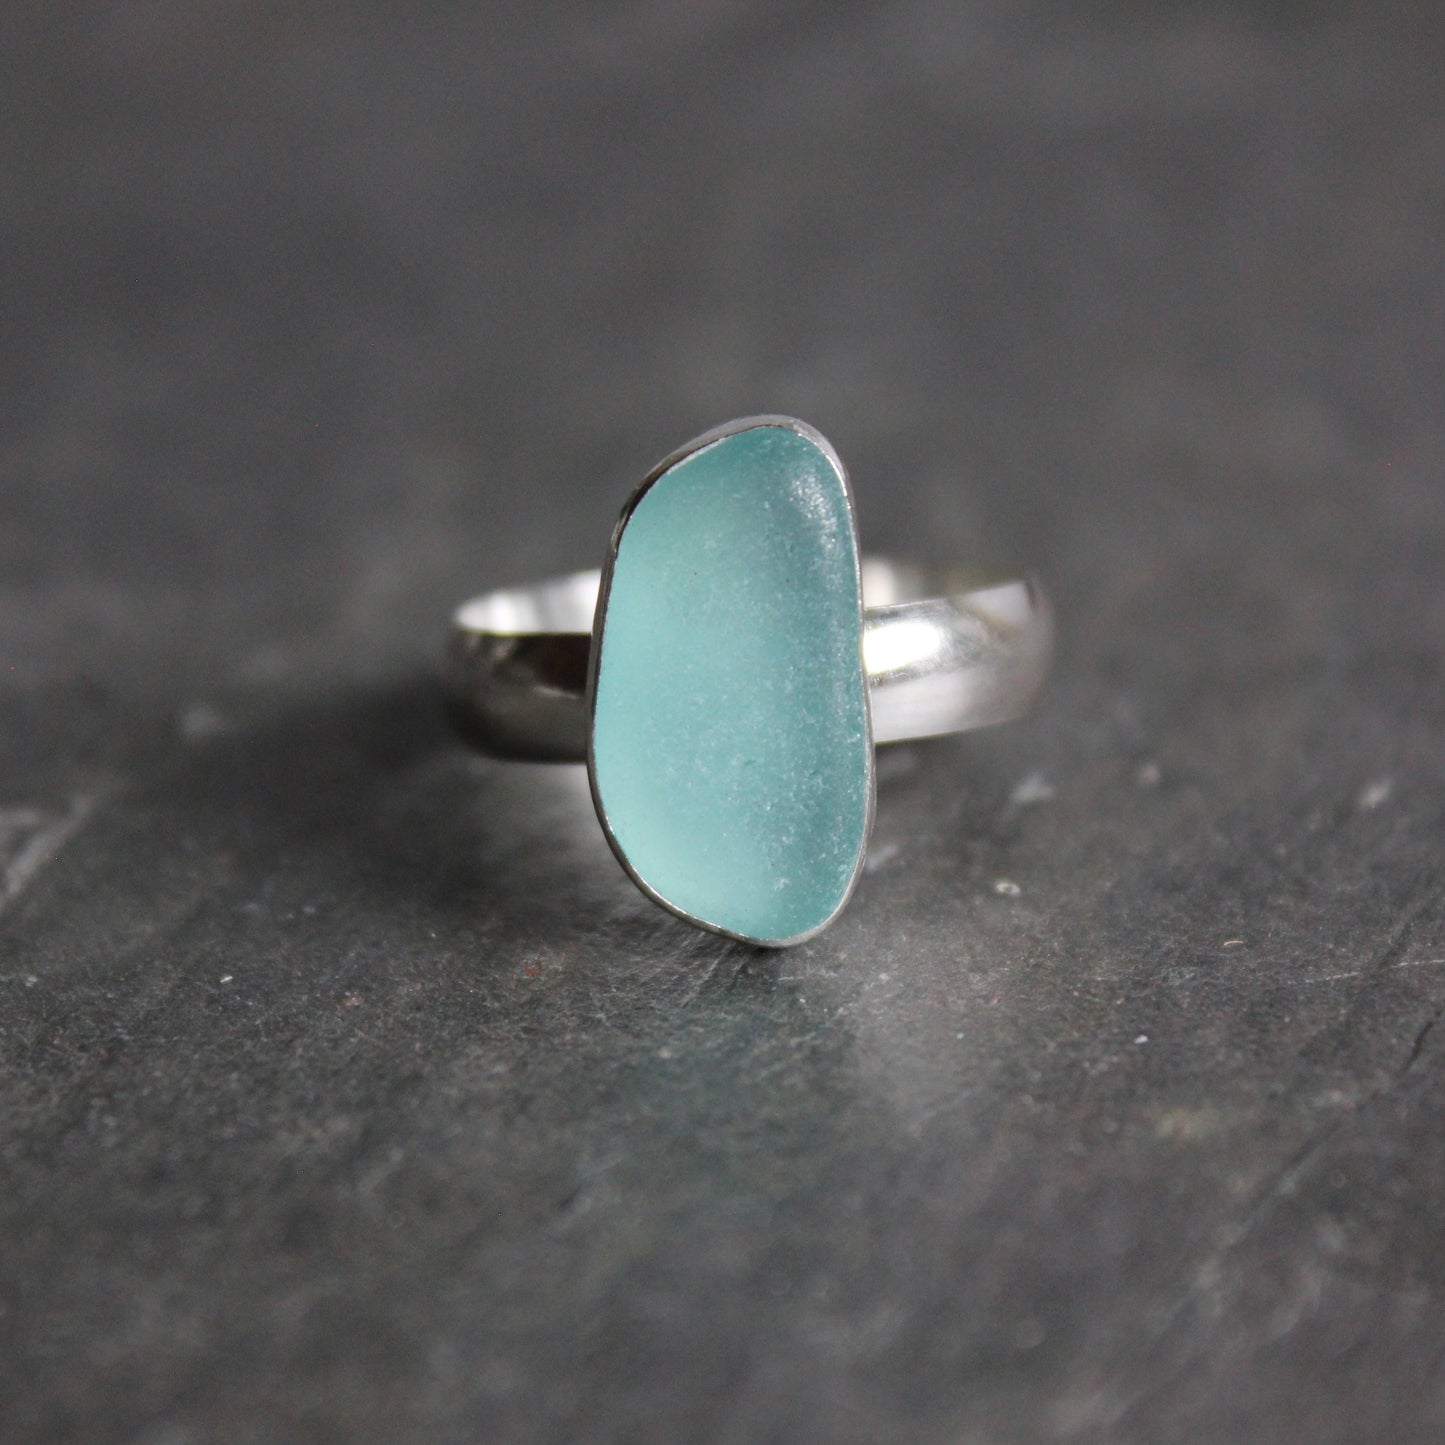 This ring has an aqua blue piece of sea glass in a fine and sterling silver bezel setting with a sturdy silver band.  Size 8 1/2